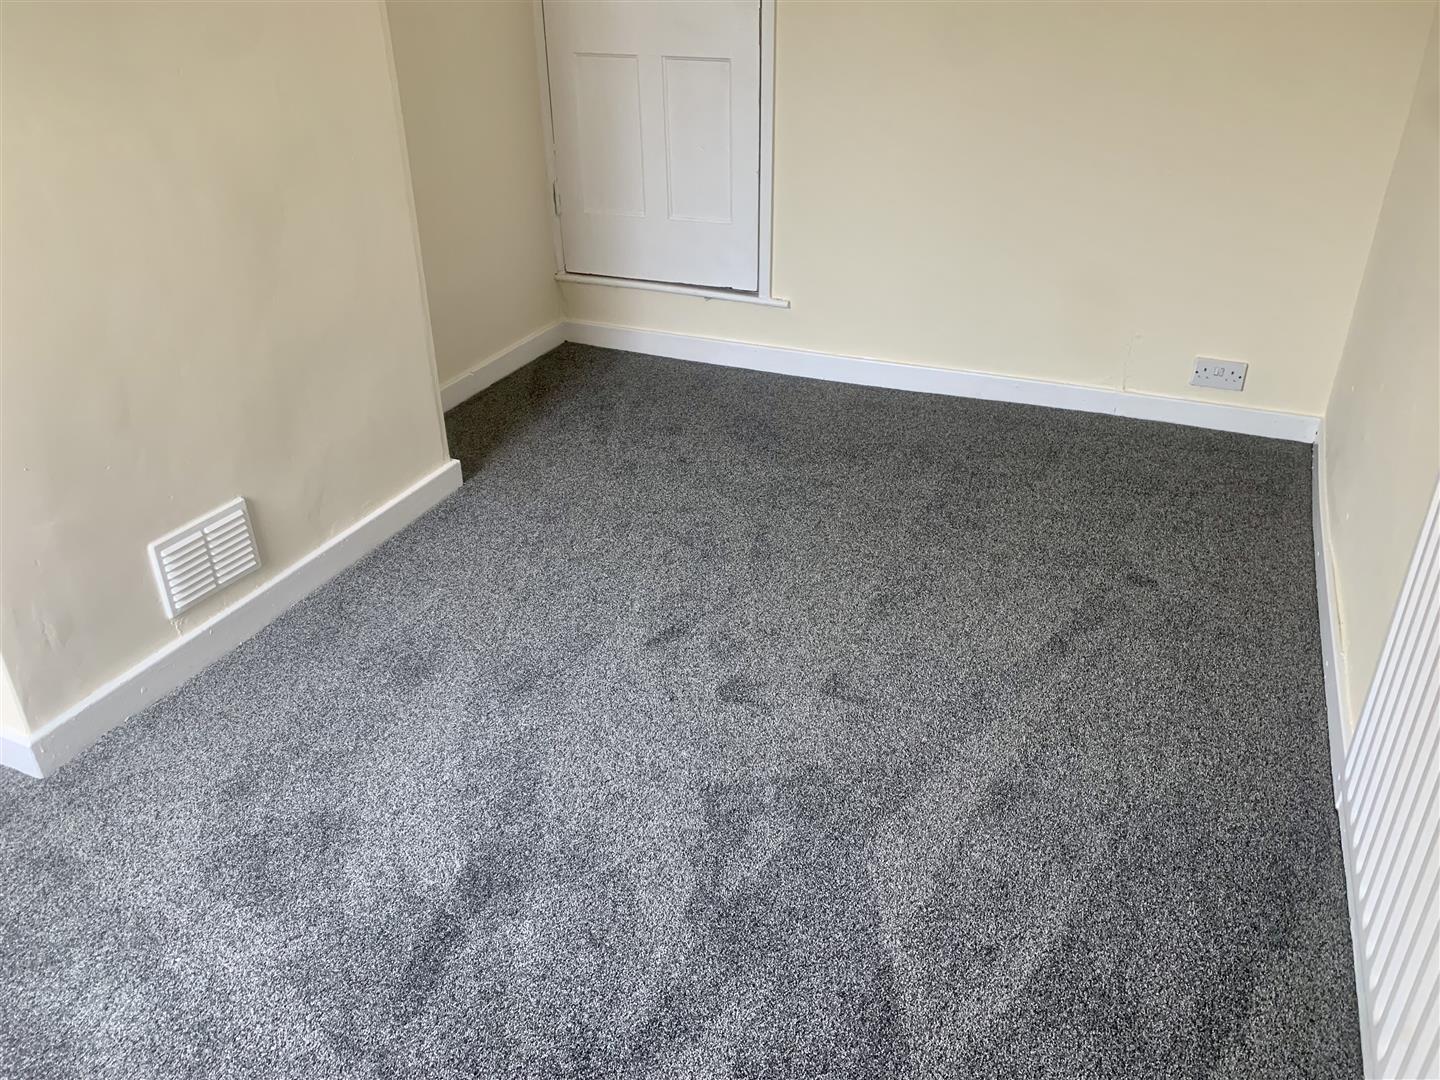 2 bed  to rent in Ilkeston  - Property Image 10